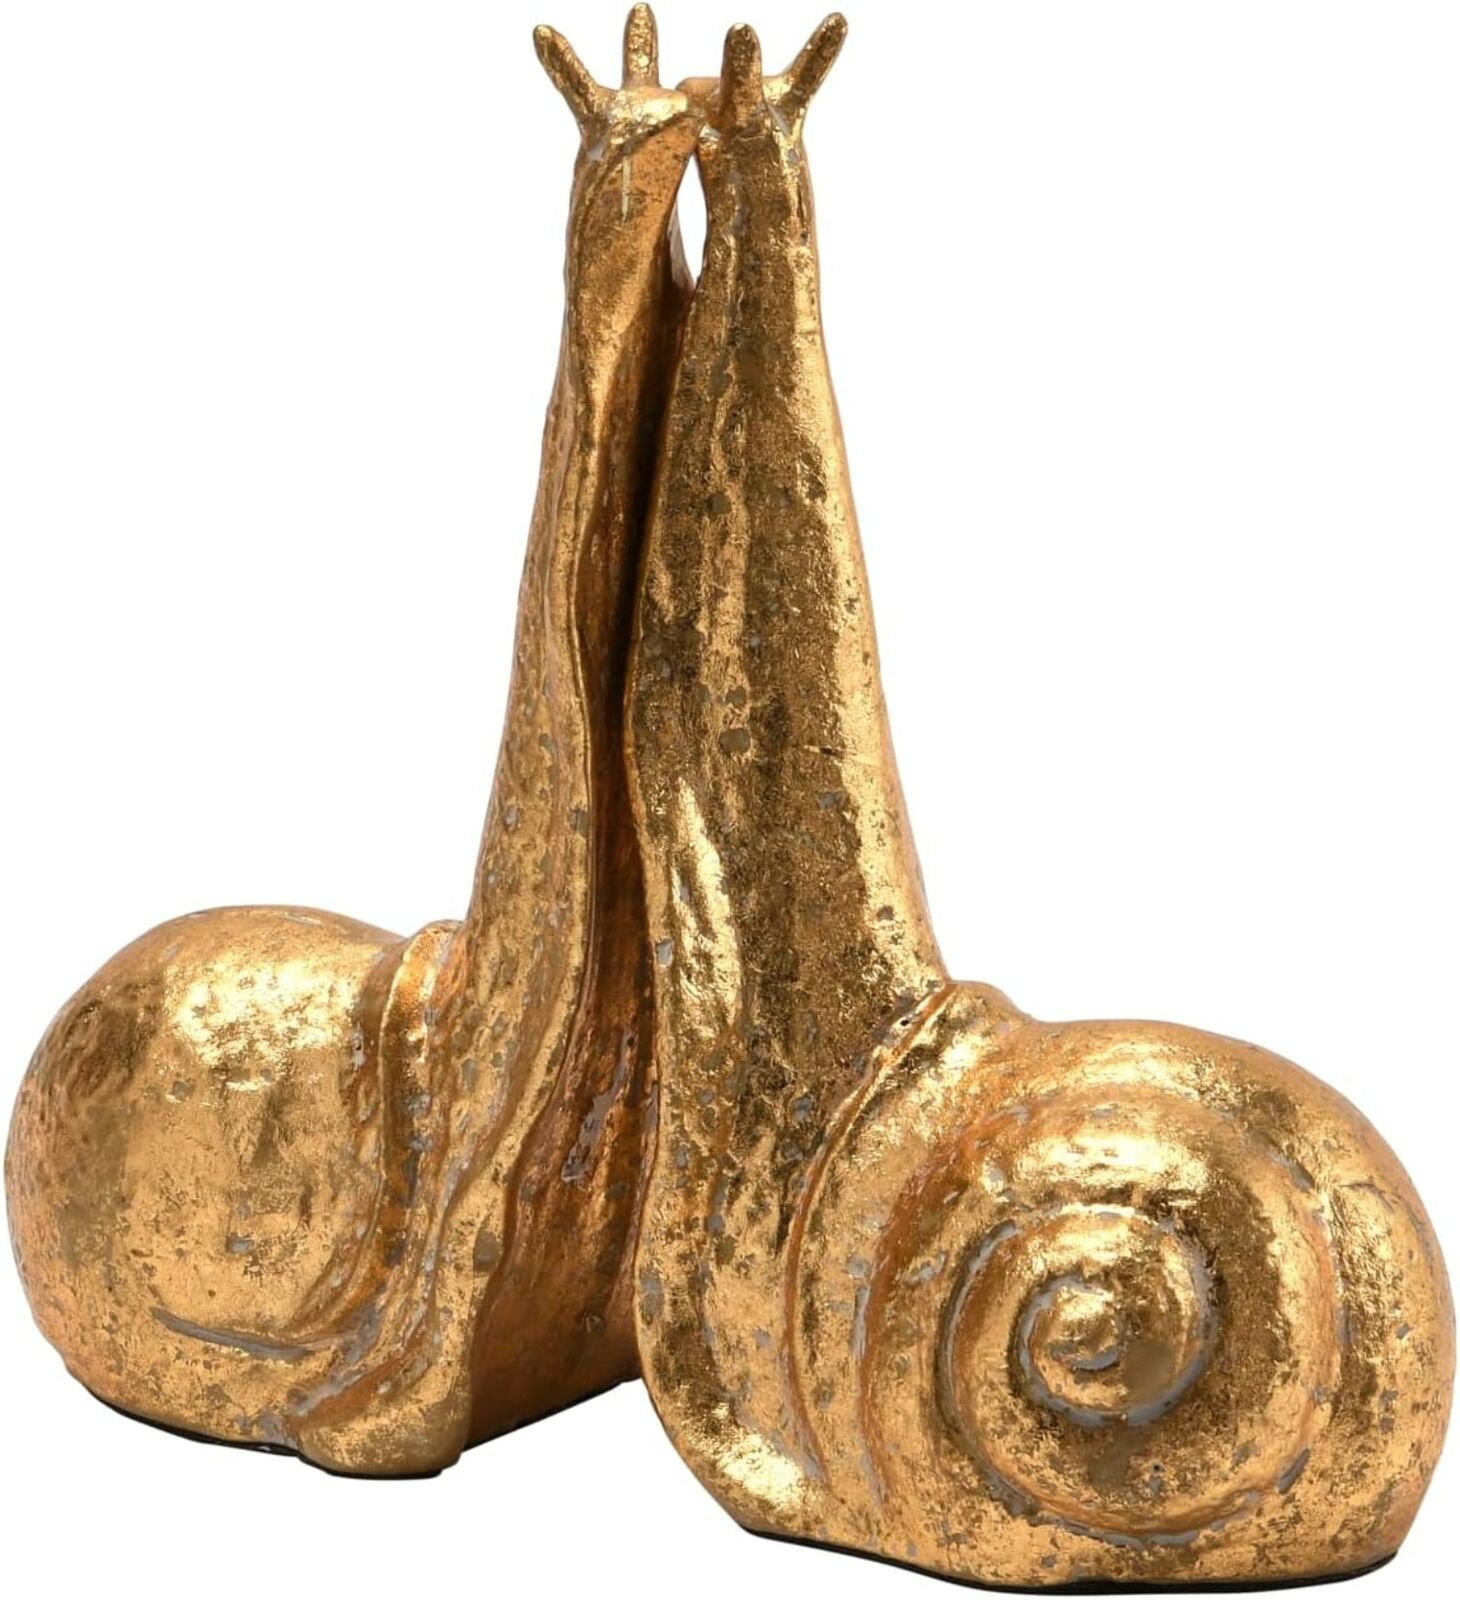 Decorative Distressed Cast Metal Snail Bookends, Gold, Set of 2